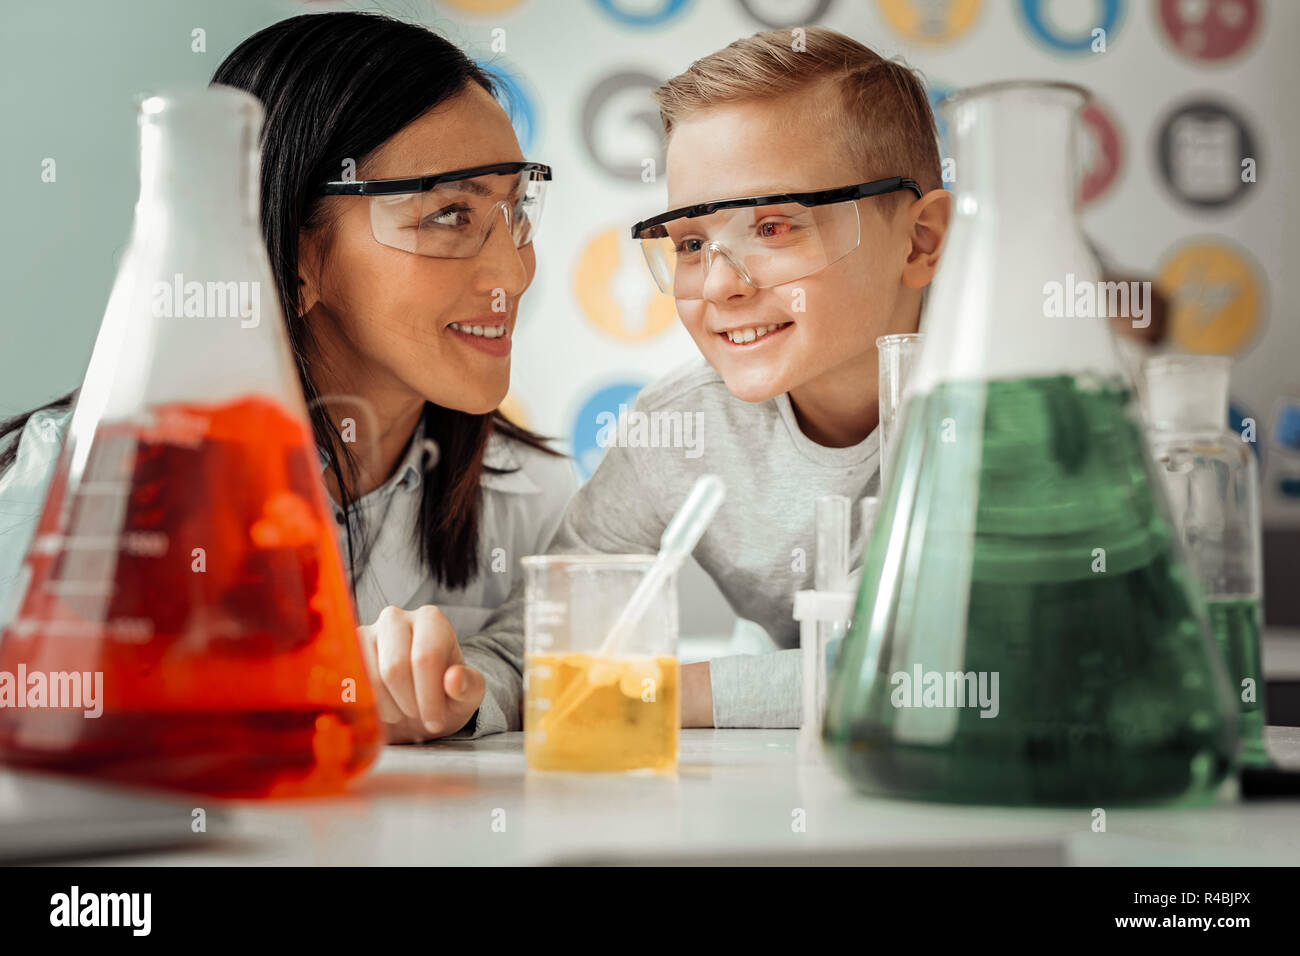 Practical lesson. Kind blonde boy keeping smile on his face while looking at test tubes with reagents Stock Photo